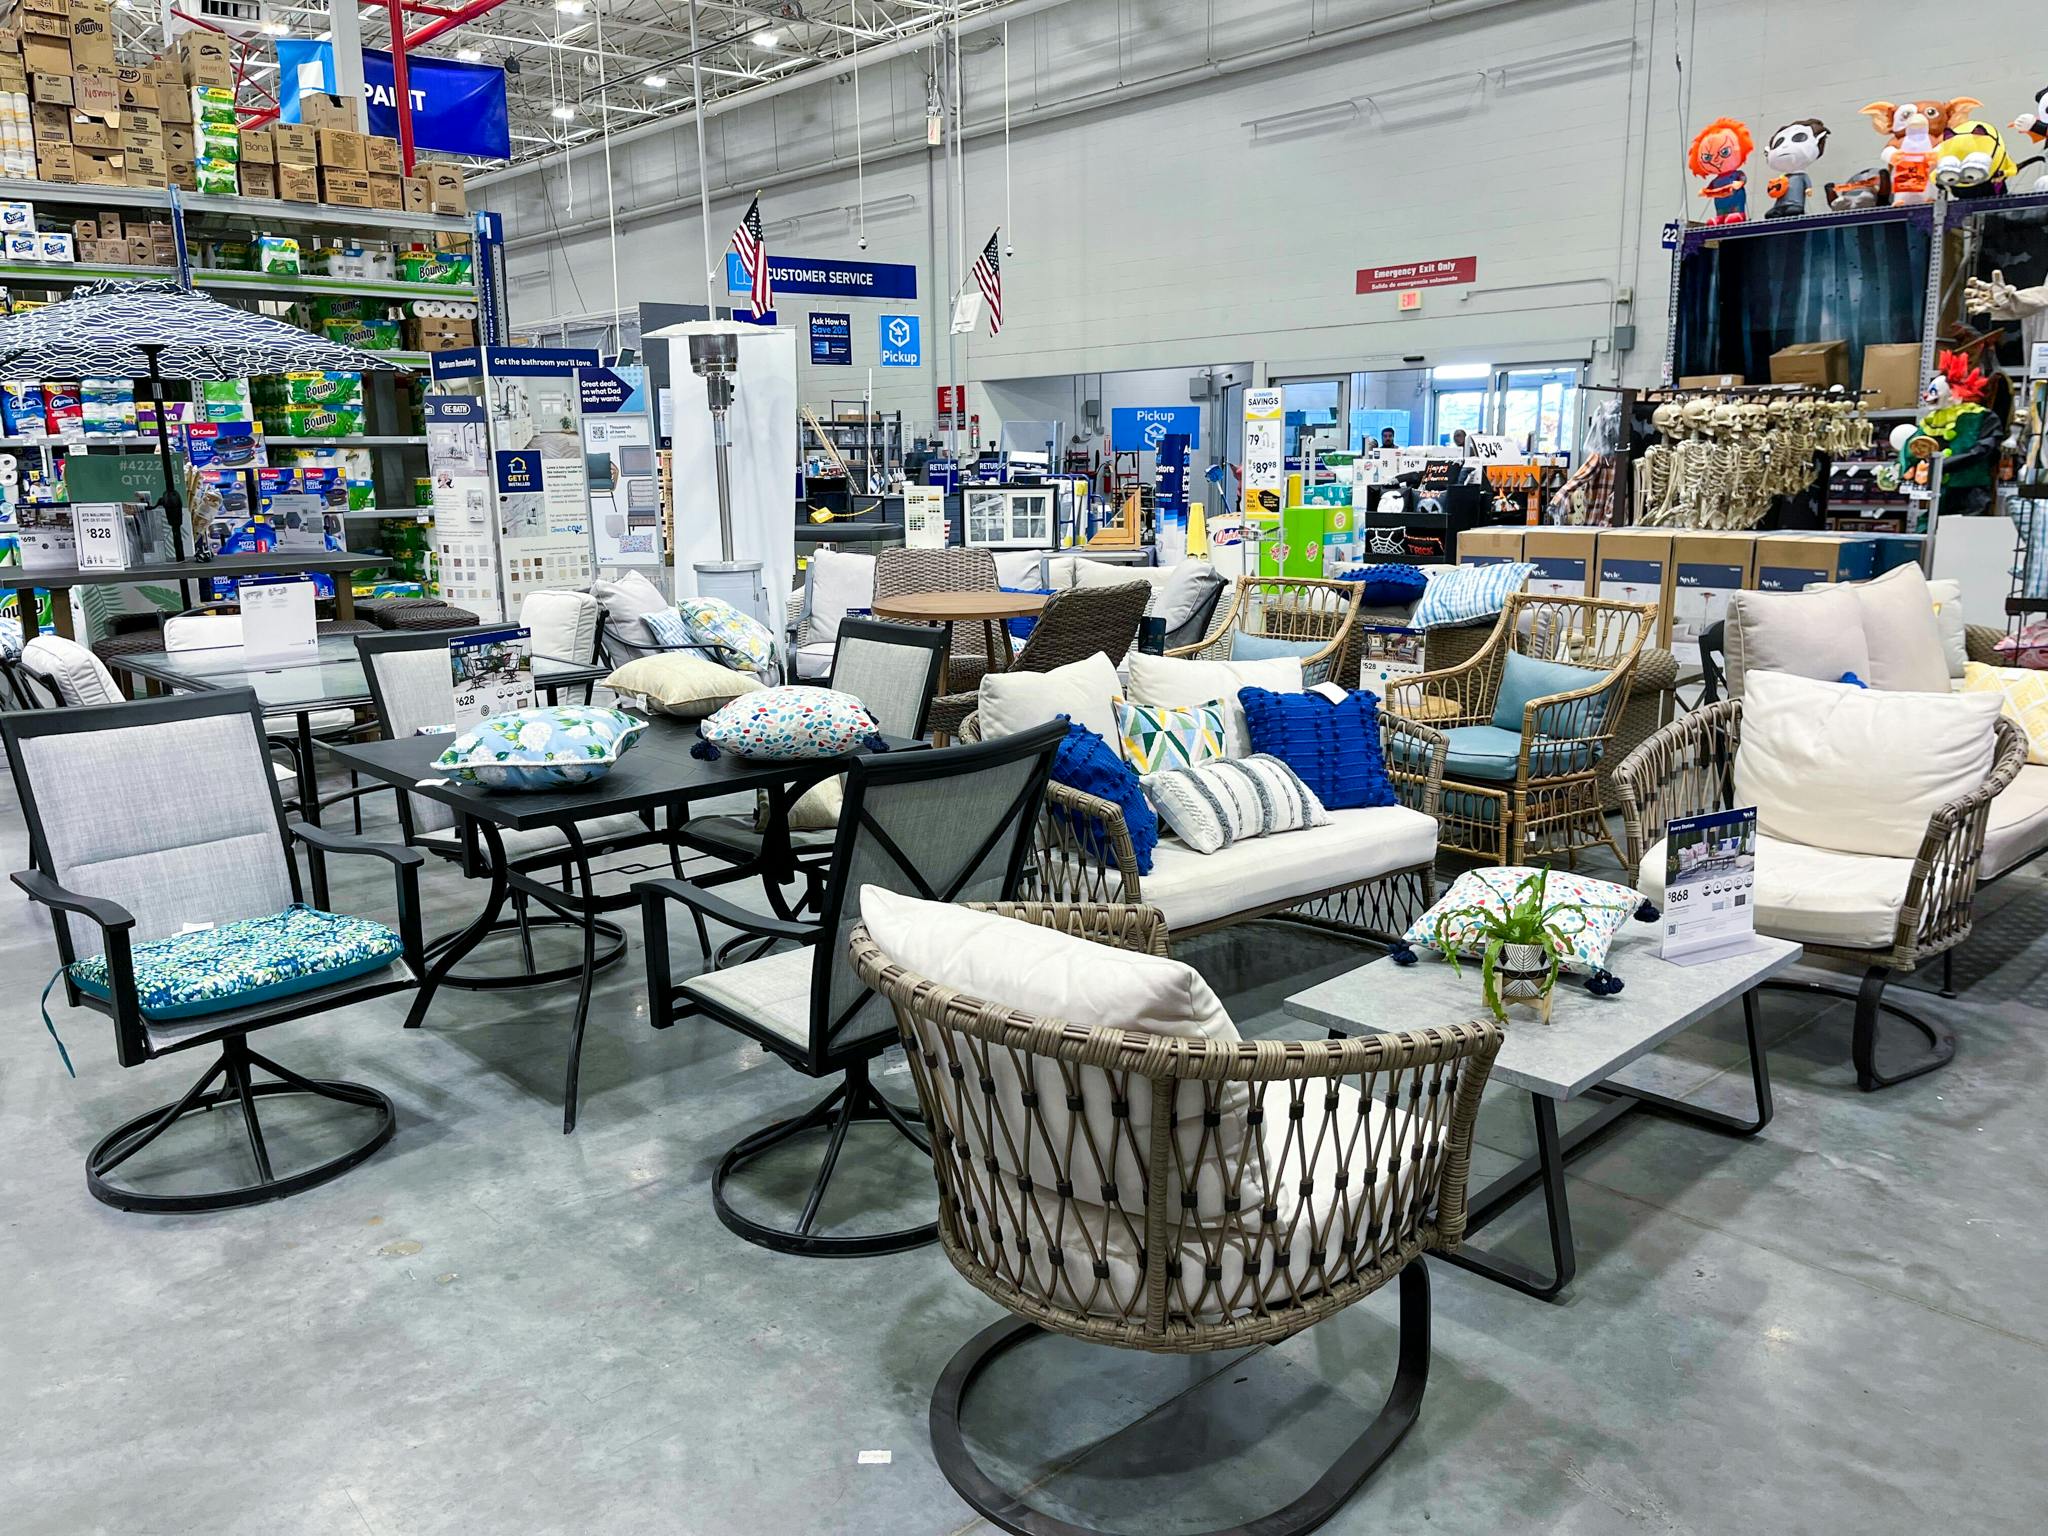 Lowe's SpringFest Sale: Deals, Dates & Strategies - The Krazy Coupon Lady